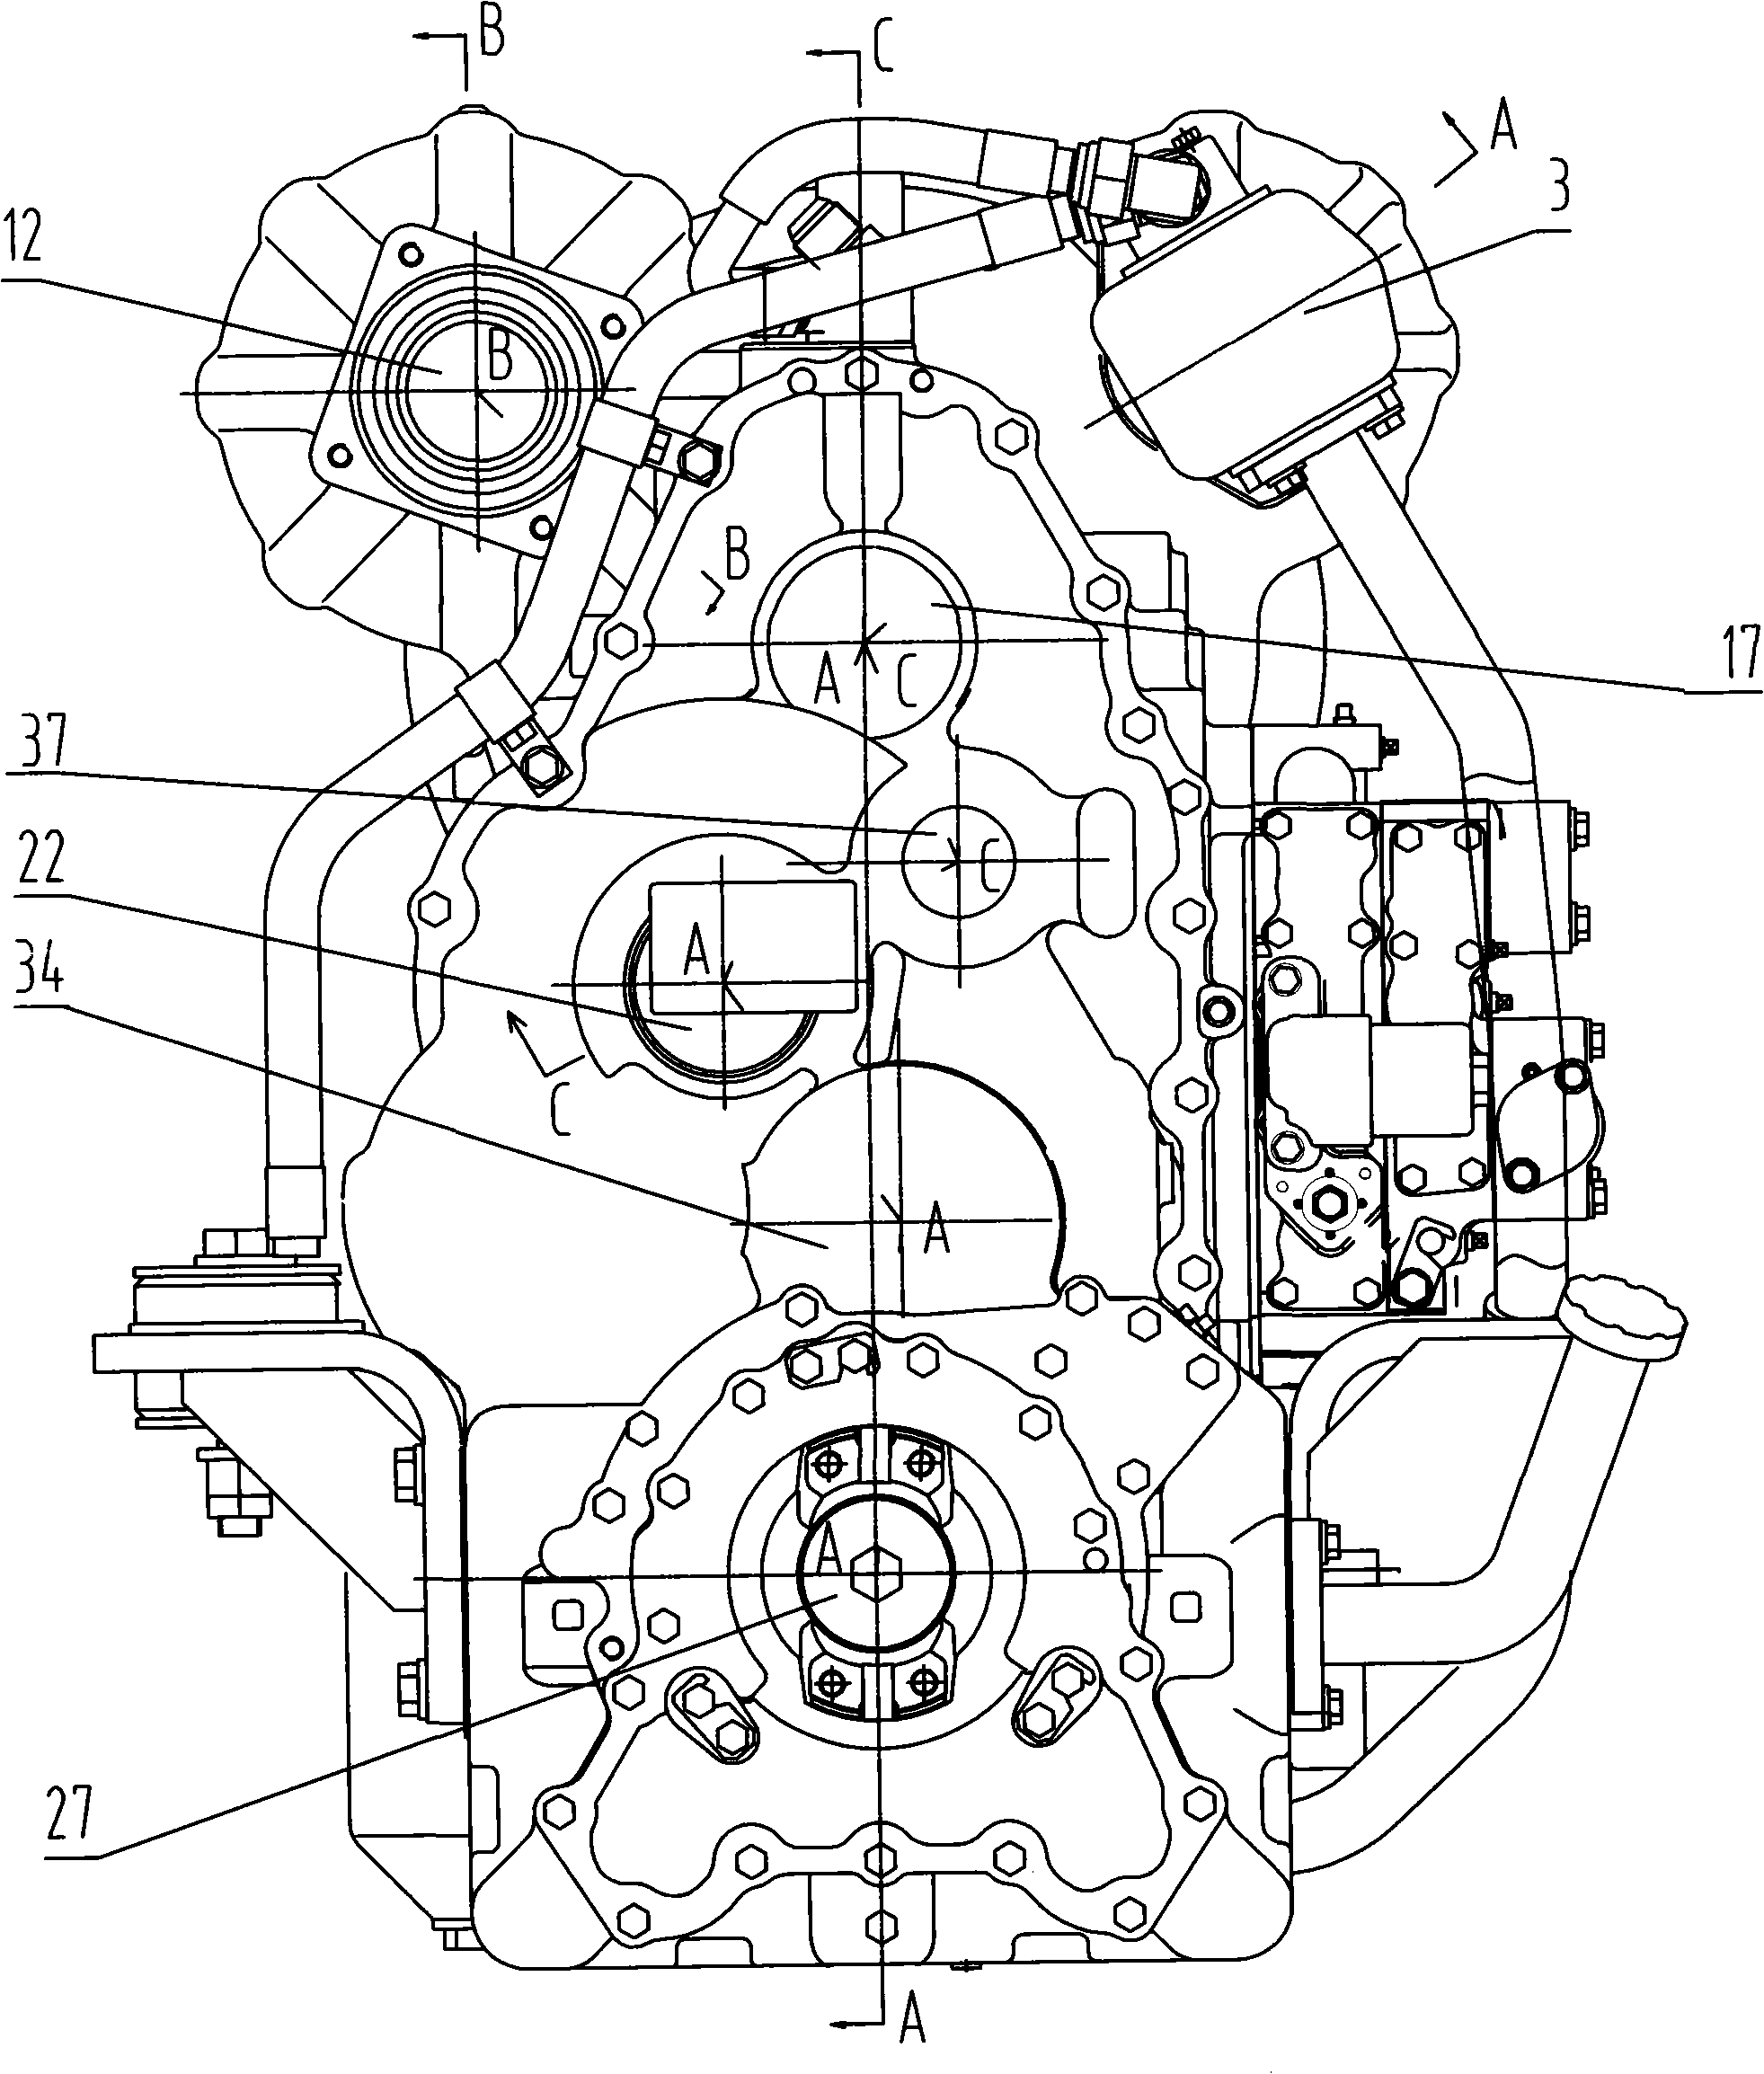 Transmission mechanism of integral power shift hydraulic transmission for engineering machinery